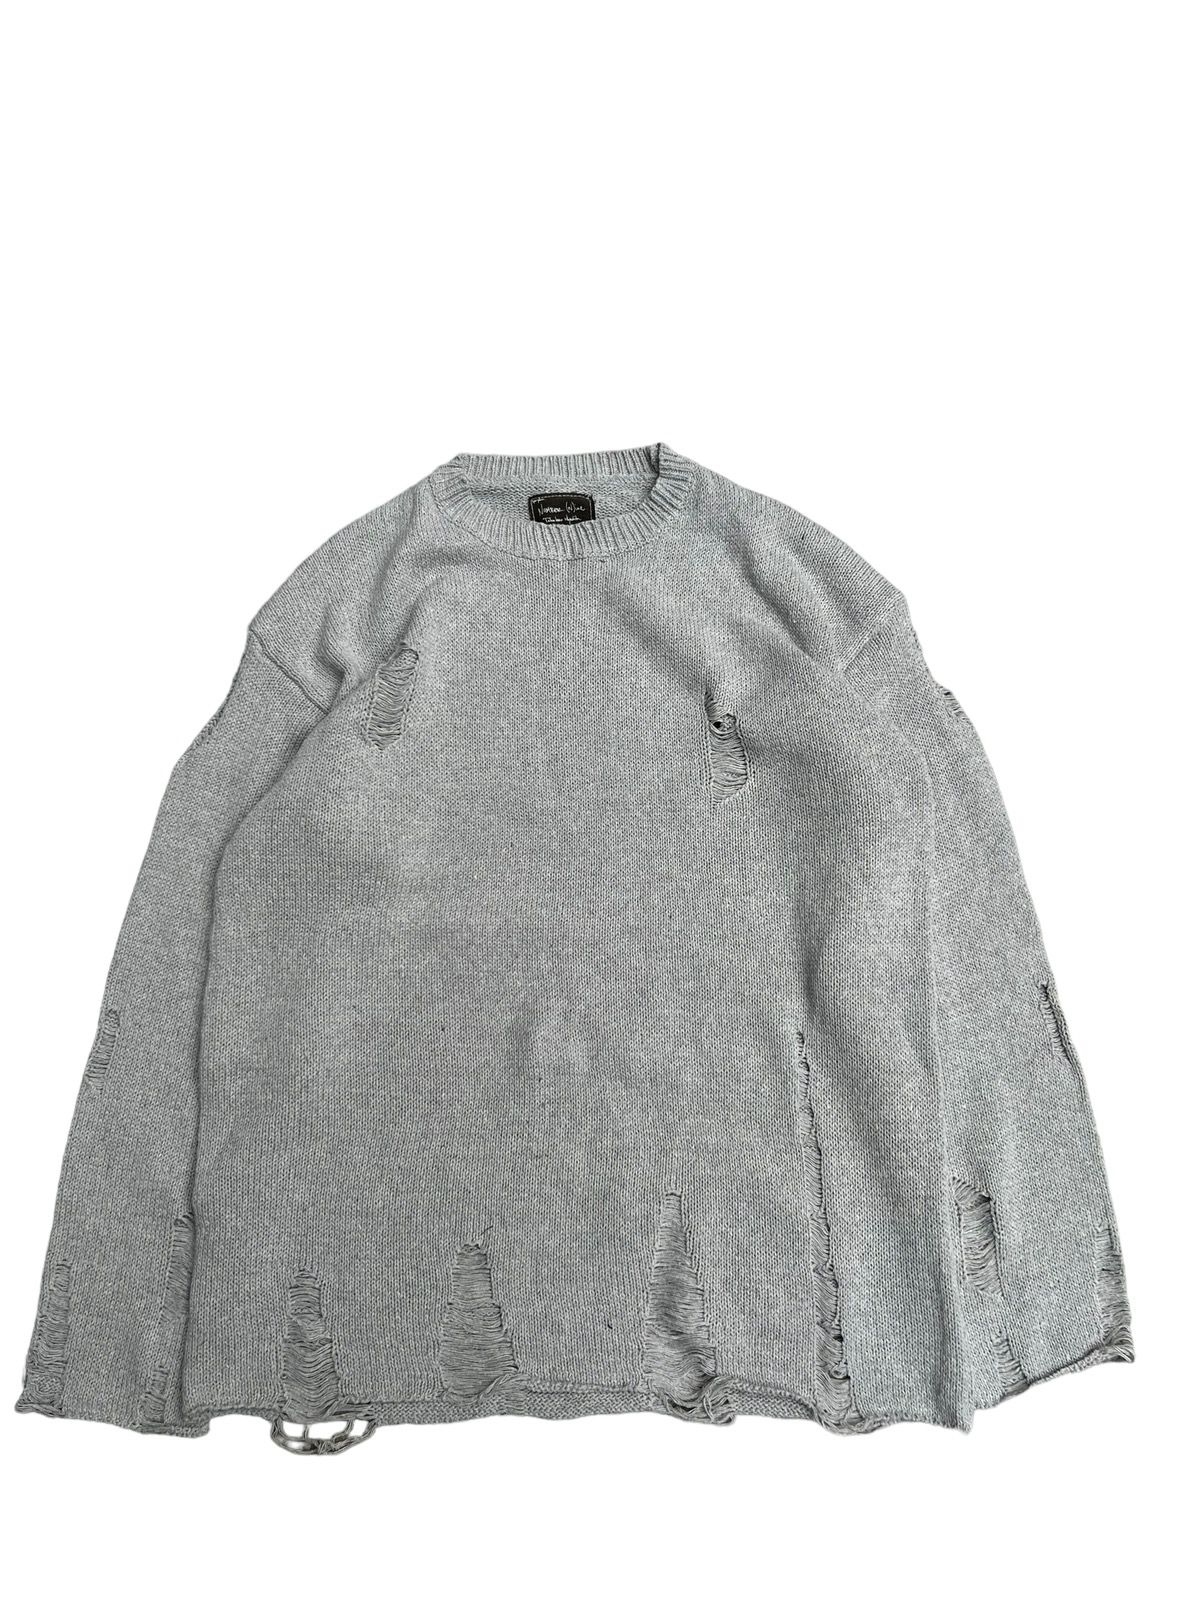 Pre-owned Number N Ine X Takahiromiyashita The Soloist Number Nine Distressed Grunge Knit Sweater In Grey